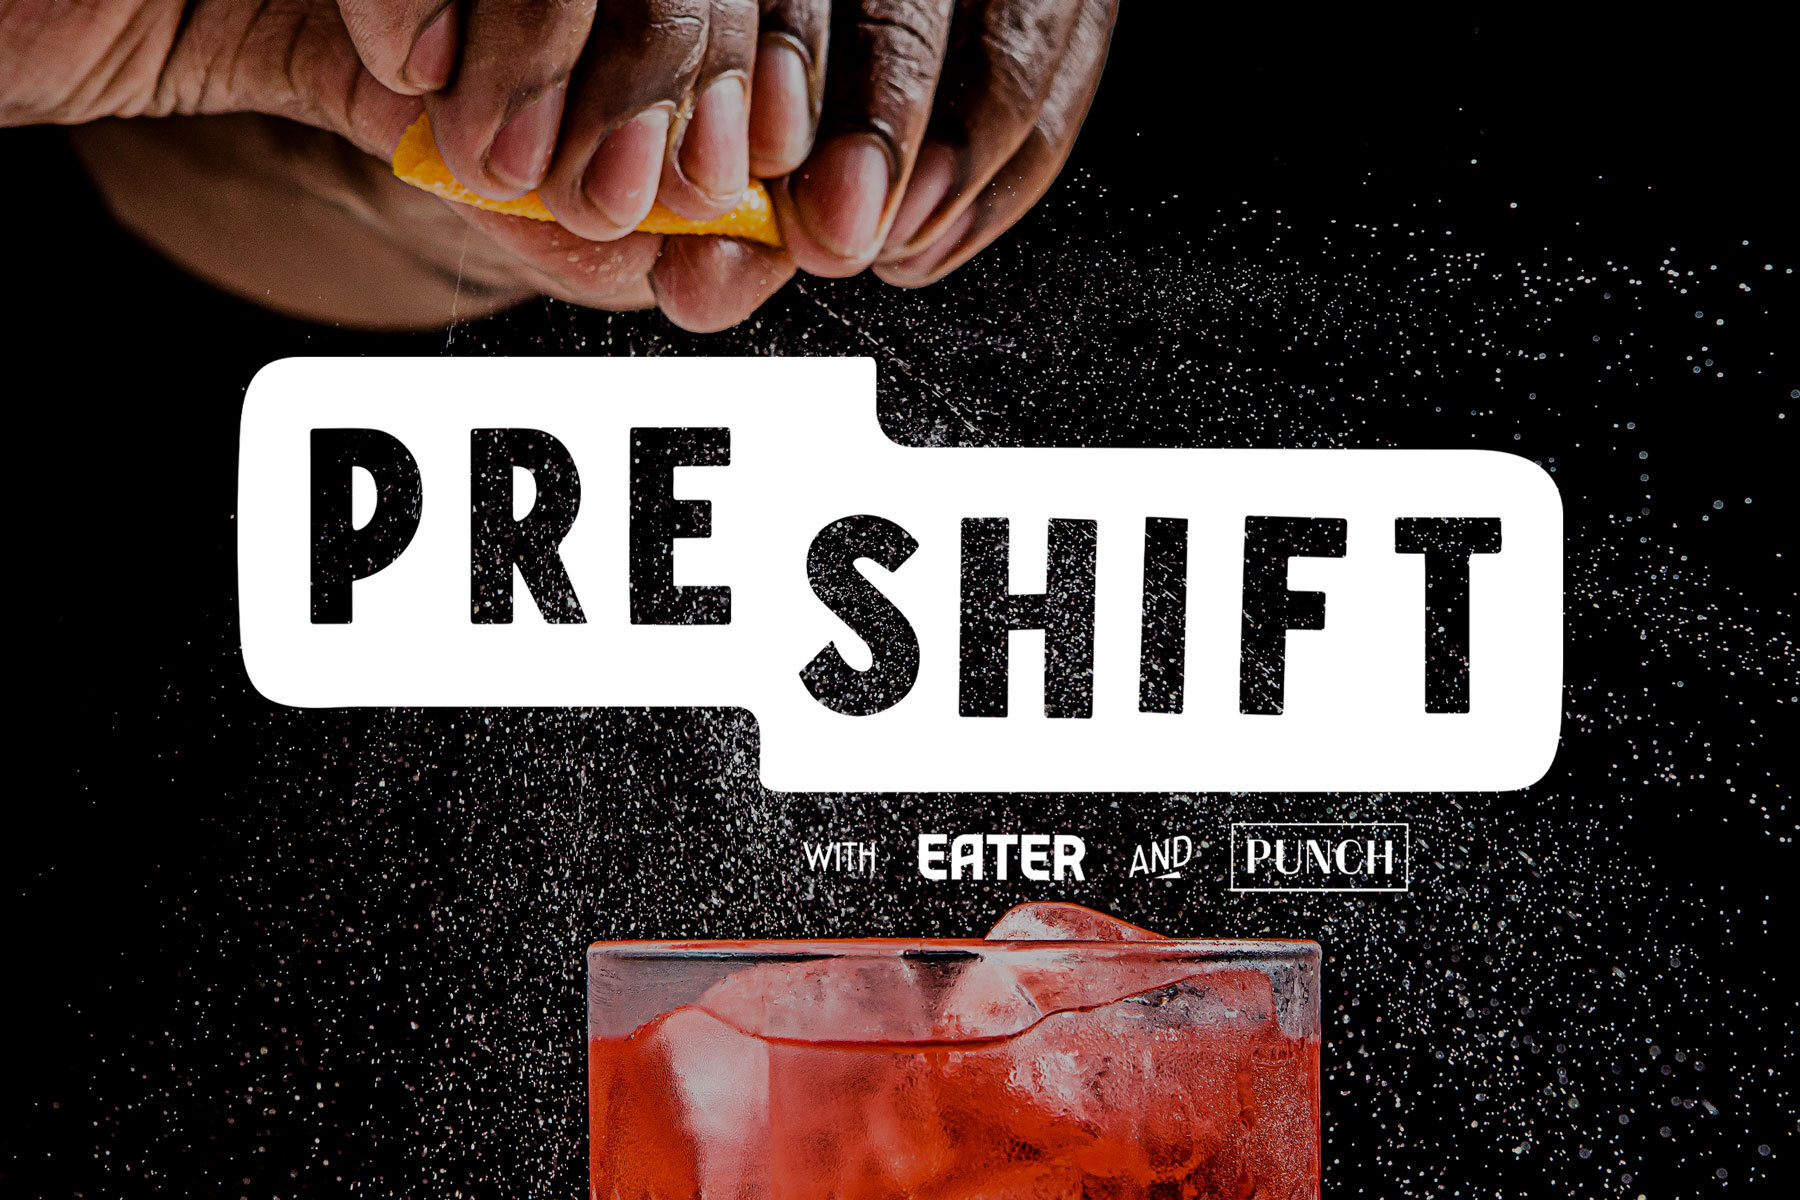 Logo reading “Pre Shift With Eater and Punch” atop a closeup photo of hands squeezing citrus into a cocktail glass